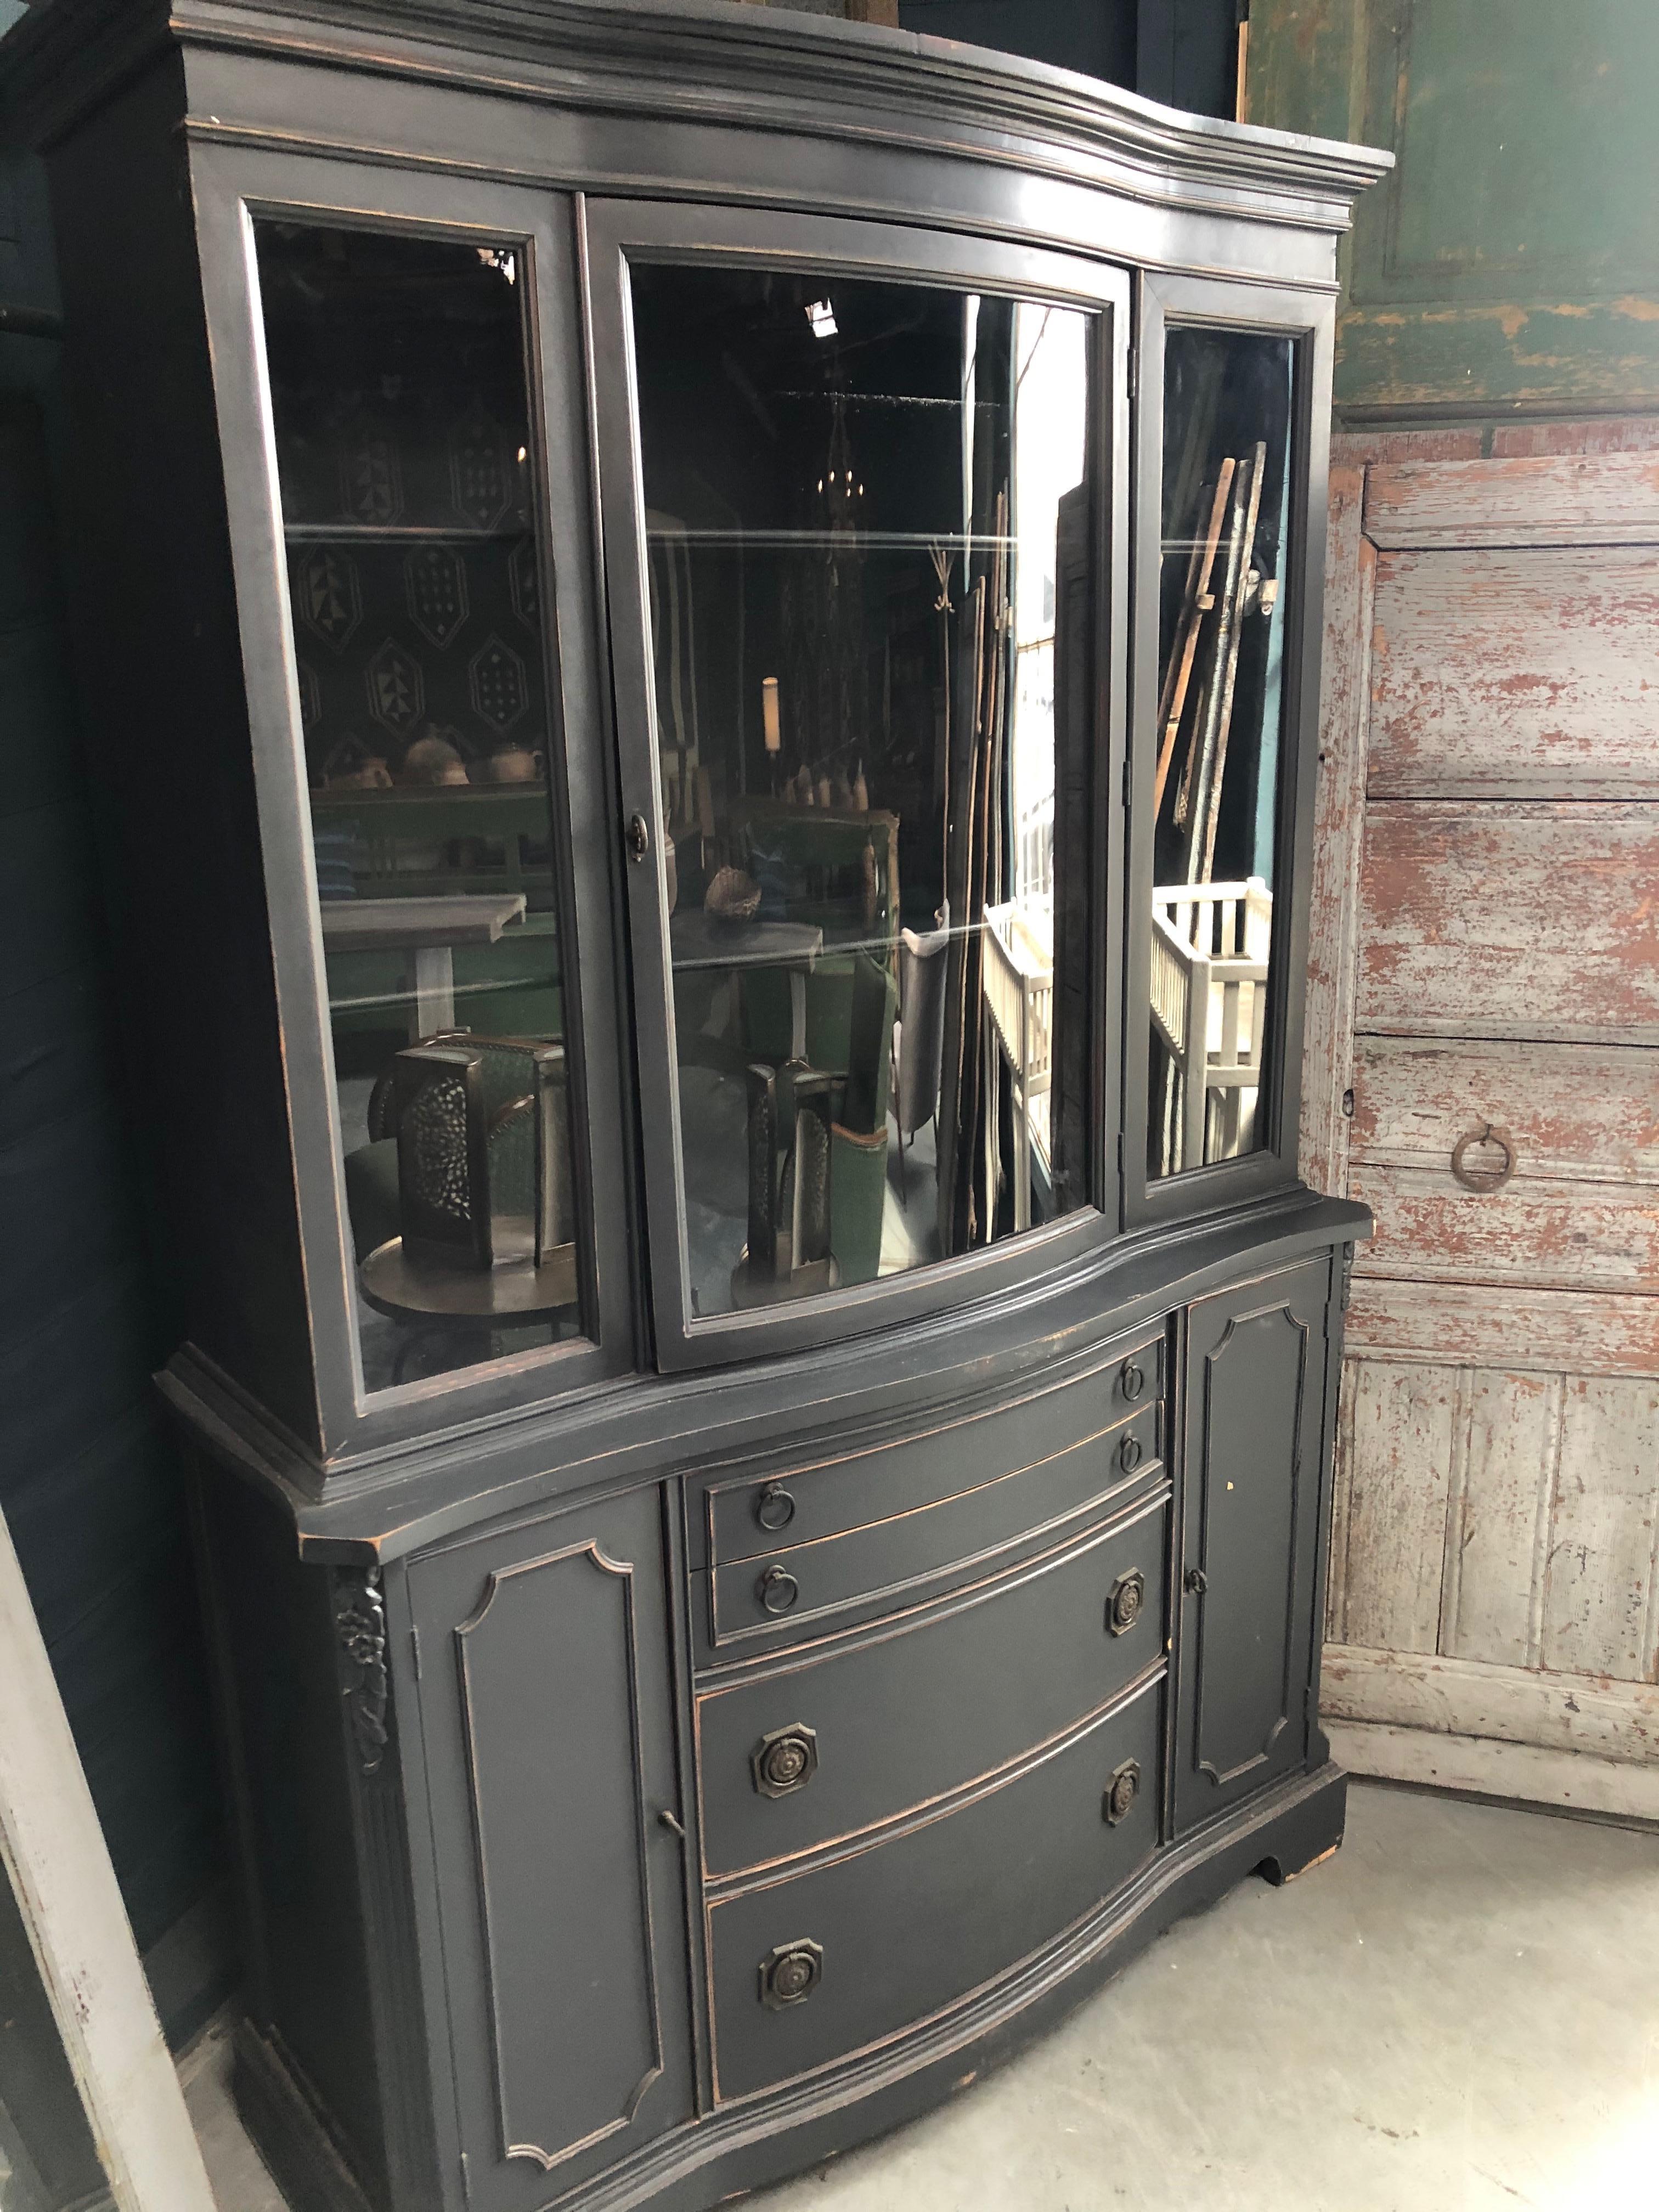 This vintage blue hutch features a sleek grey color and multiple storage options. The top part of the hutch has clear windows perfect for displaying objects while the bottom features pull out drawers and two small doors, great for more discreet